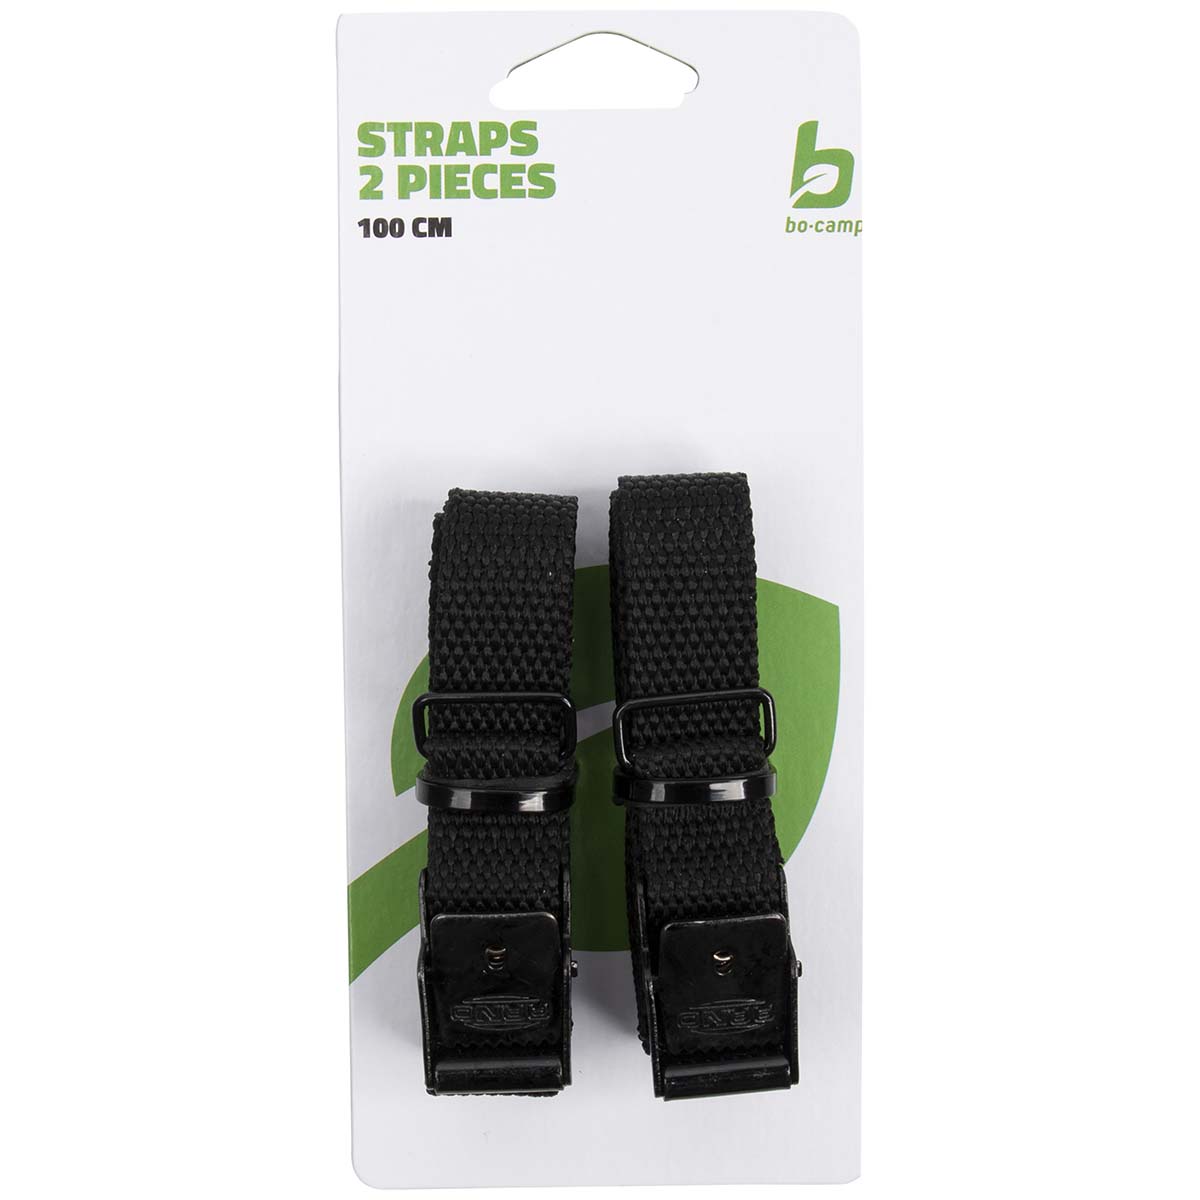 5410225 A universal tie strap of the highest quality. This multifunctional tie strap can be tied to almost anything. Equipped with an extra sturdy galvanized steel buckle. Packed in units of 2.